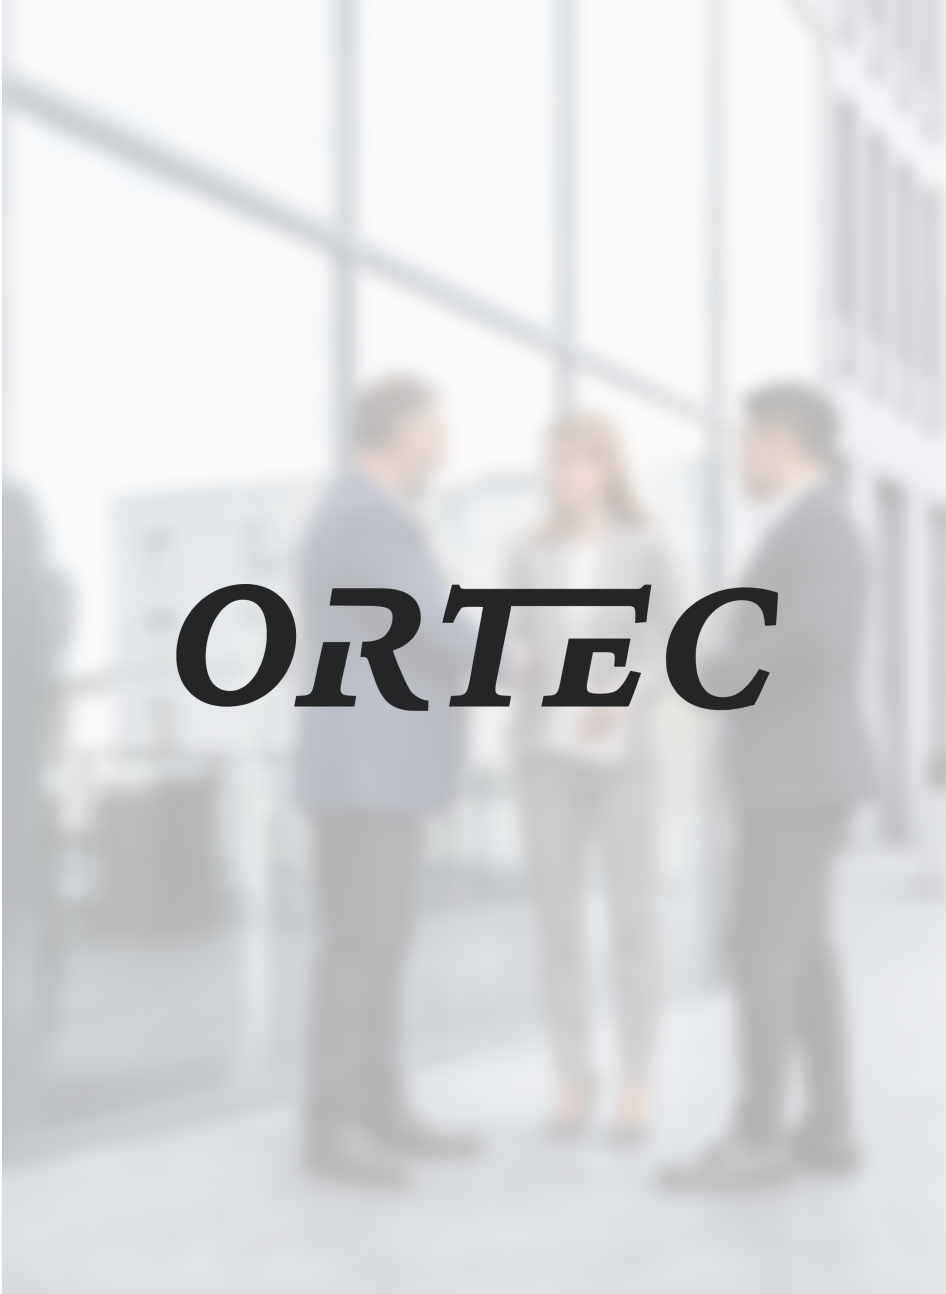 Ortec logo on top of blurred image of colleagues in an office hallway